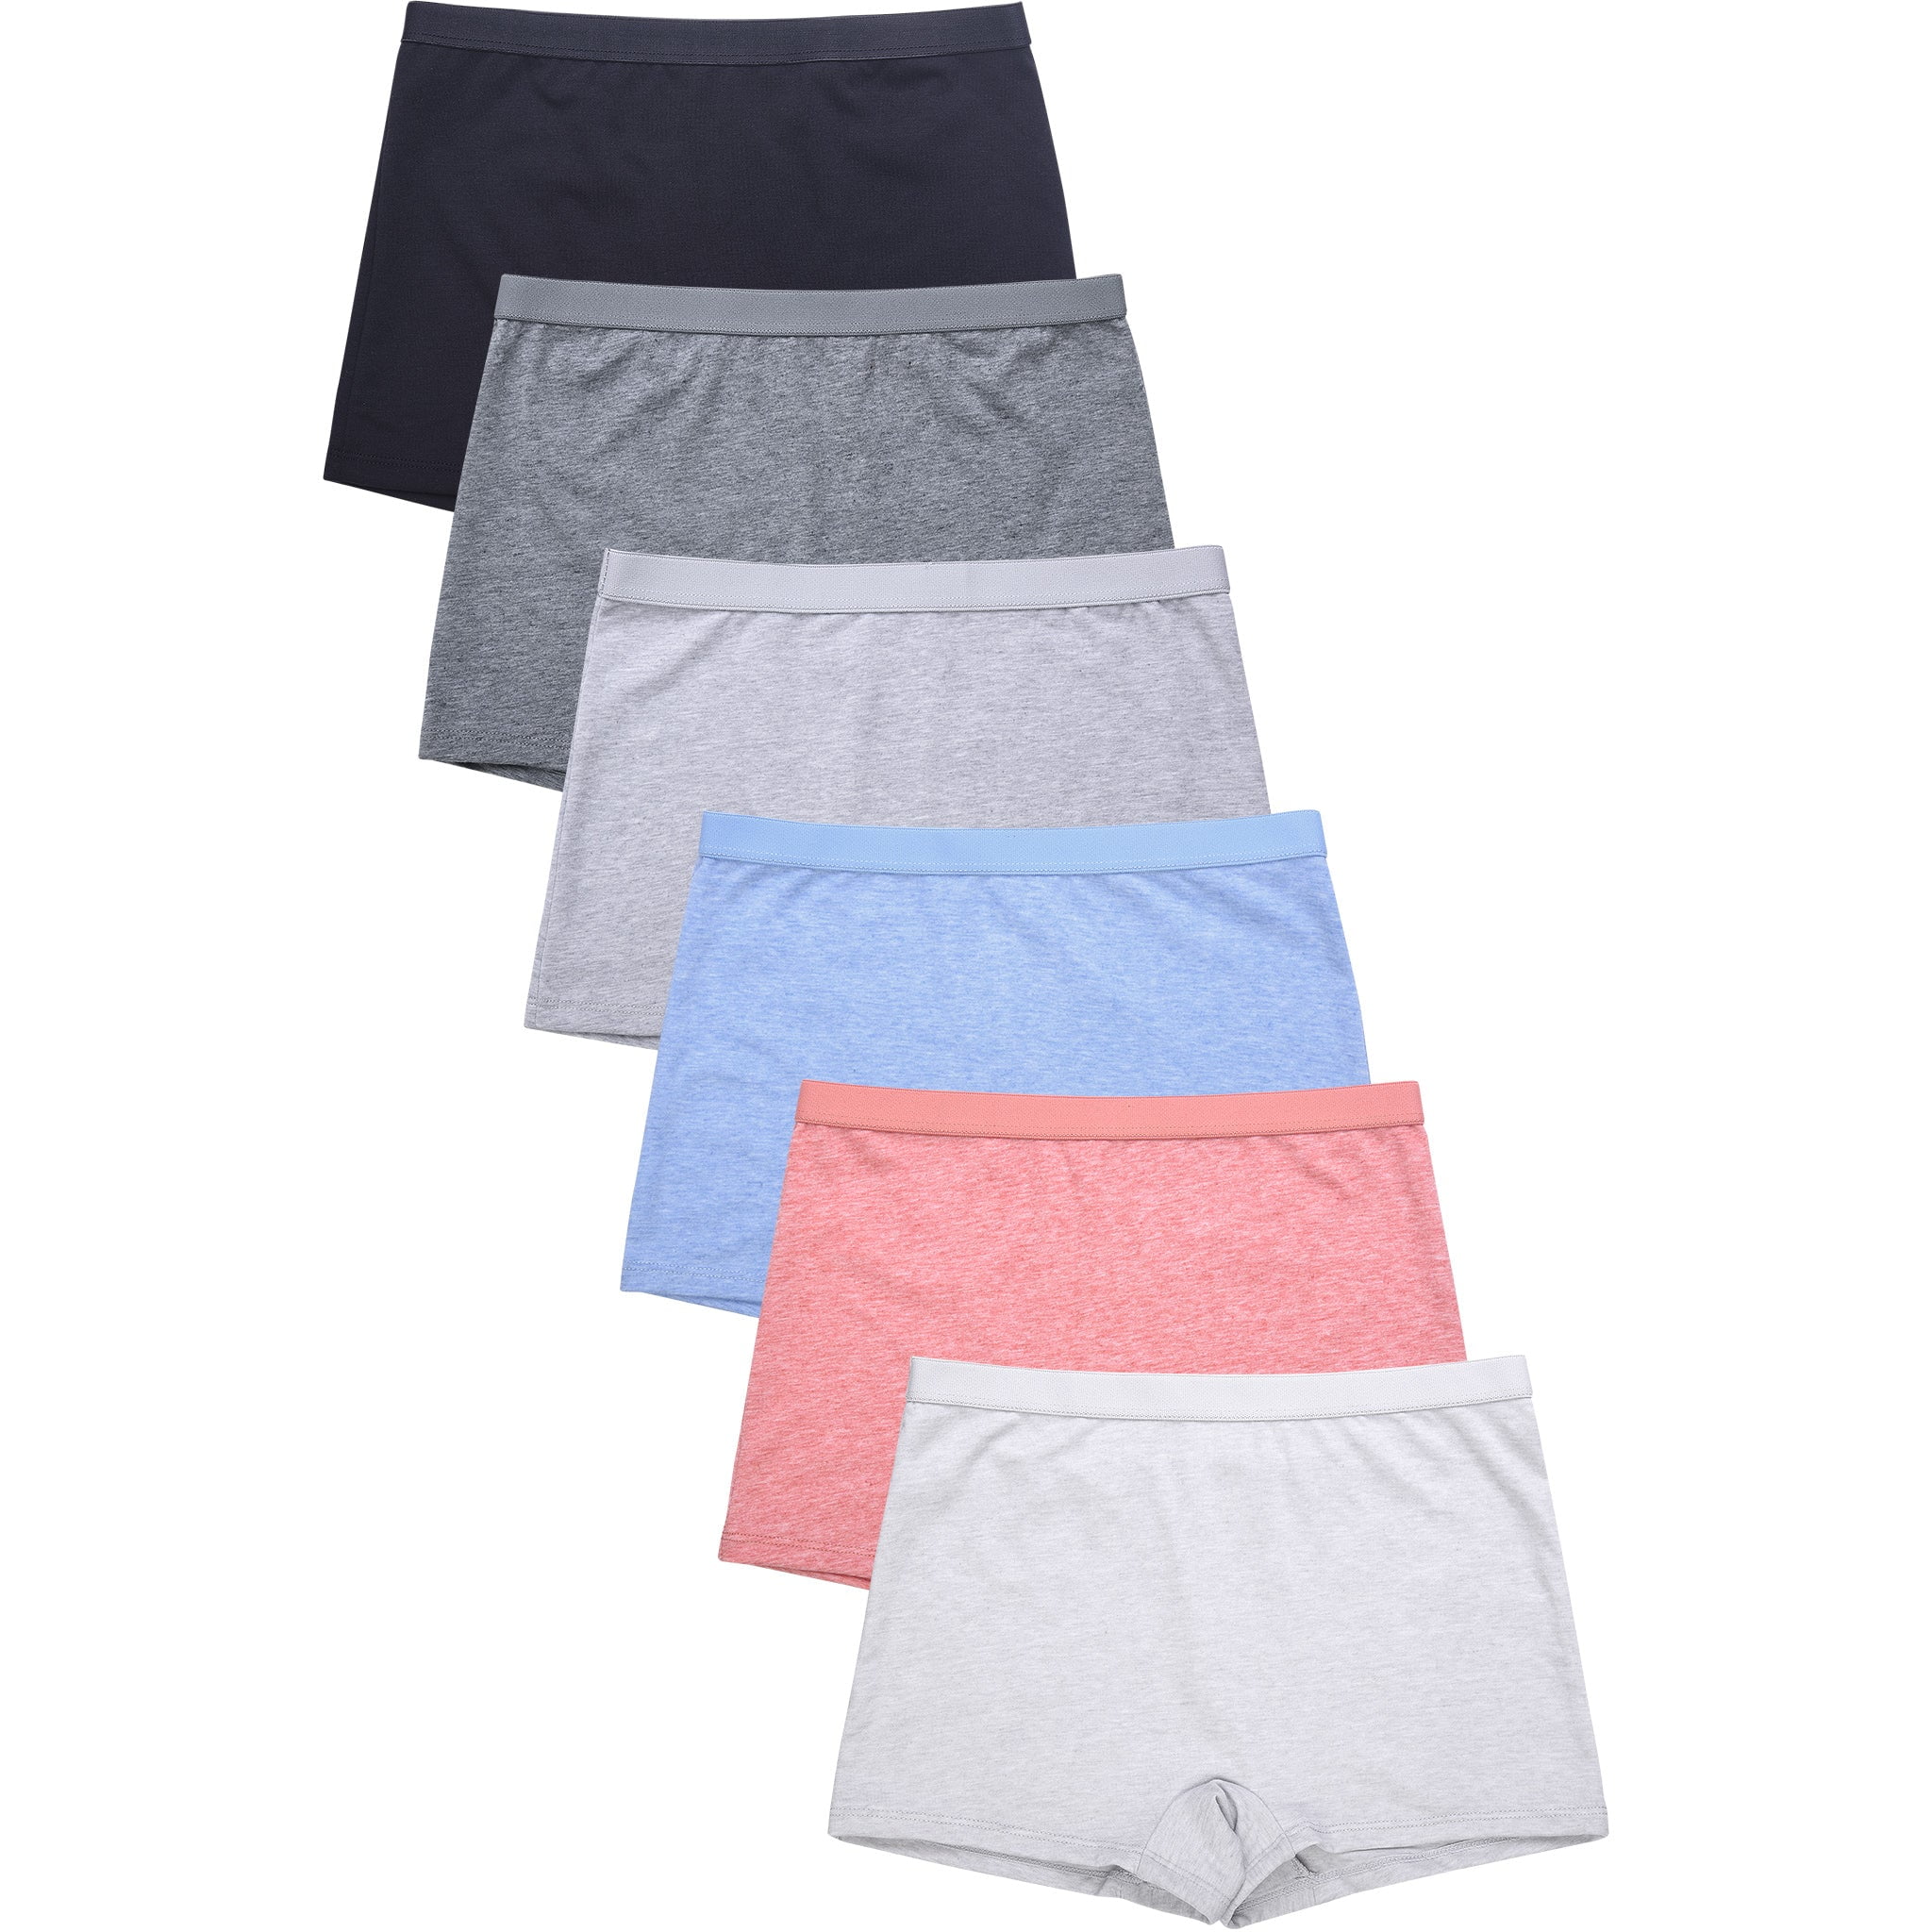 3 Pack of Womens Maxi Briefs (7001 Nude) High Waisted Panties